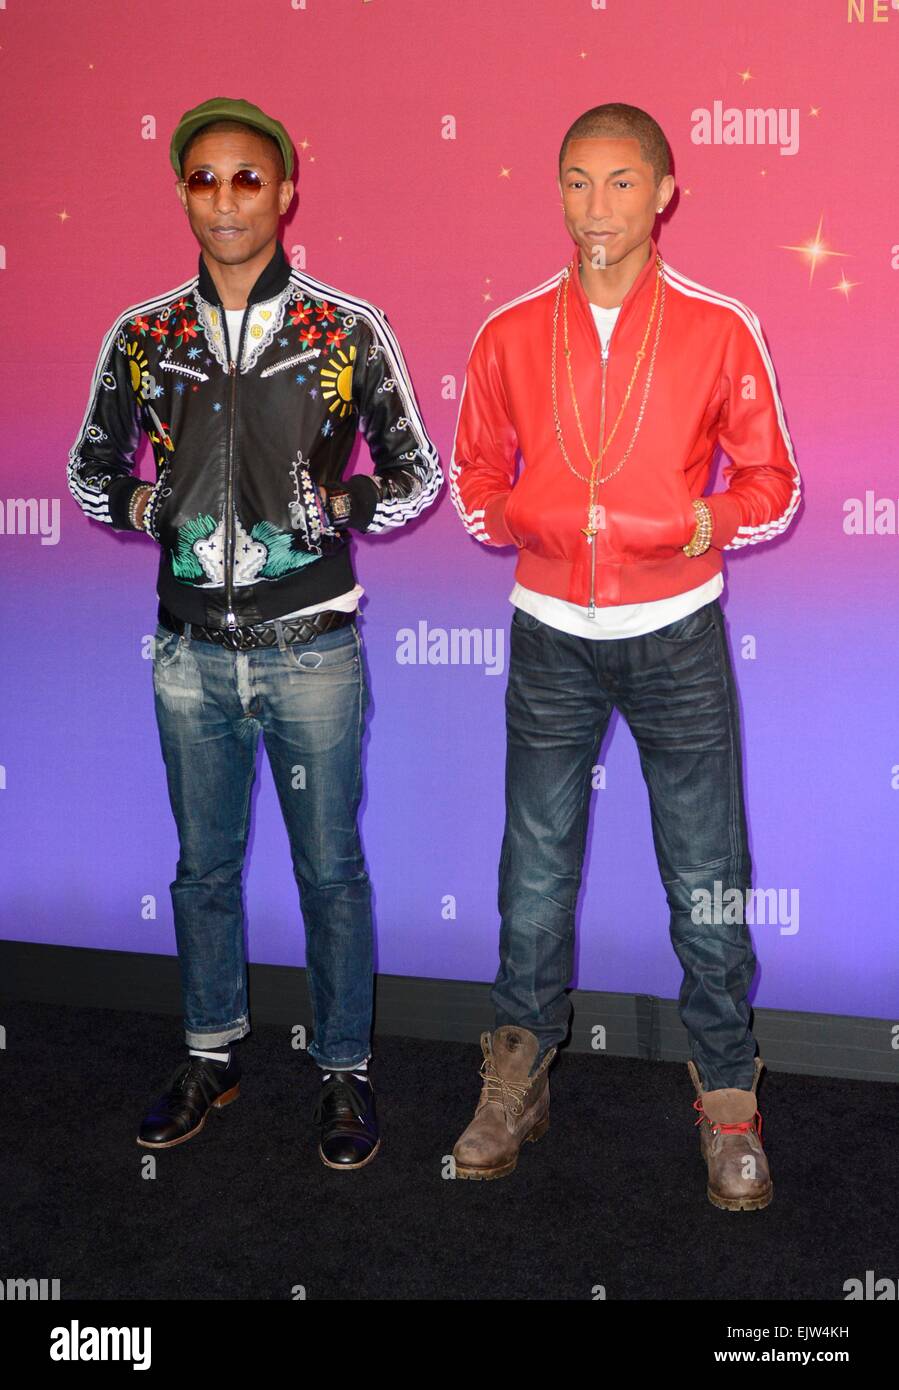 New York, NY, USA. 1st Apr, 2015. Pharrell Williams in attendance for Madame Tussauds Unveils Wax Figure of Pharrell Williams, Madame Tussauds New York, New York, NY April 1, 2015. Credit:  Derek Storm/Everett Collection/Alamy Live News Stock Photo